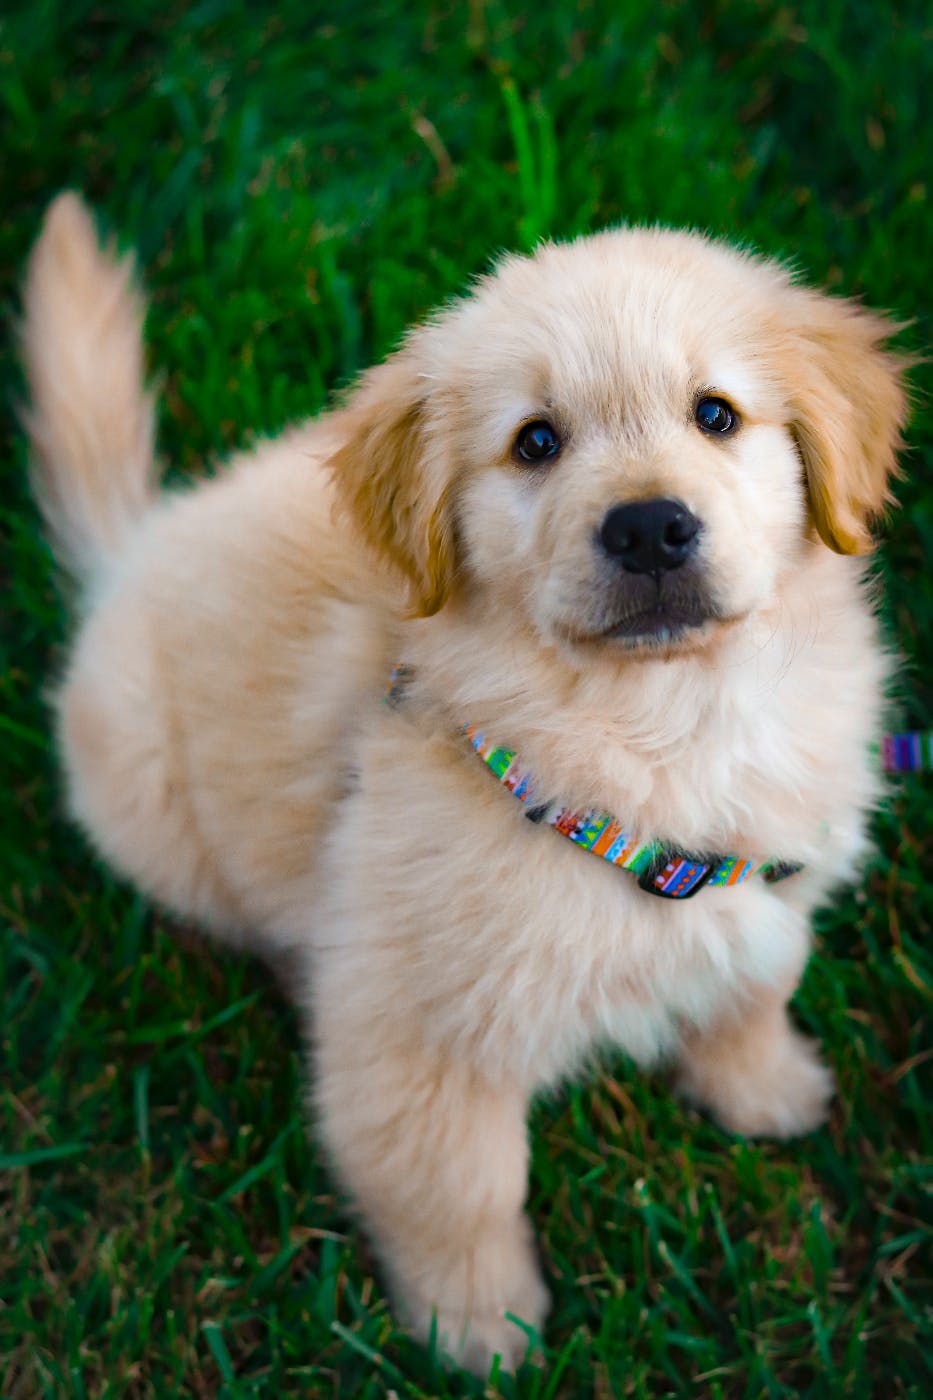 A golden retriever puppy with a colorful collar looking up at the camera